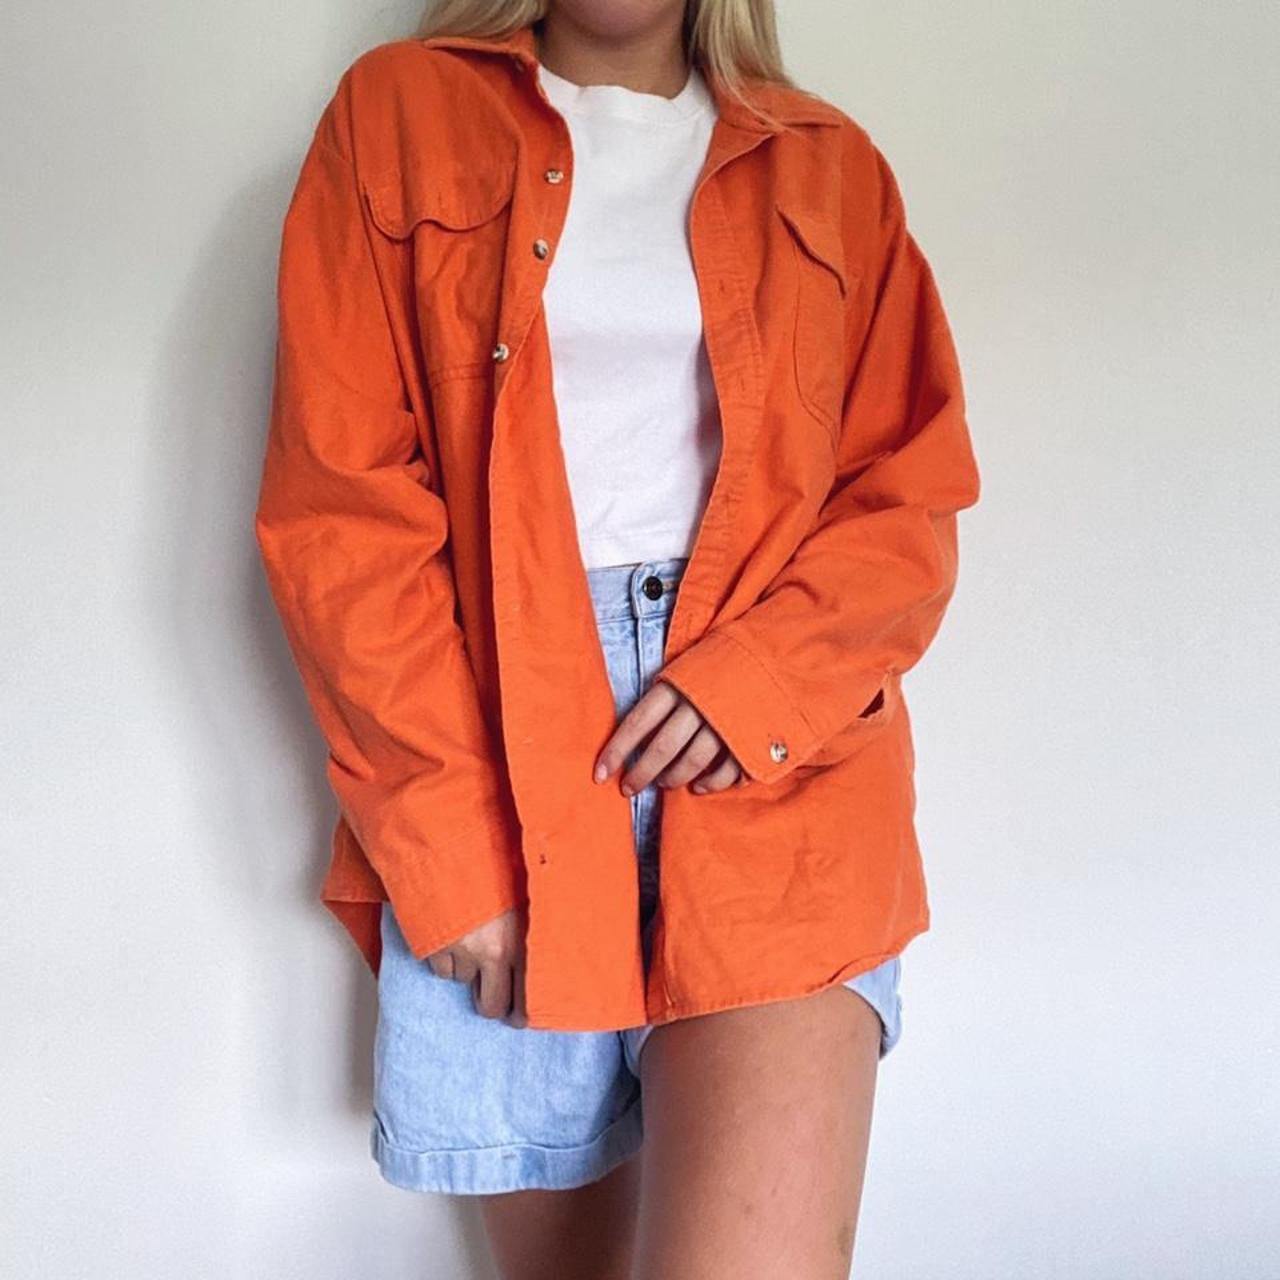 Vintage orange button up - I’m obsessed with this... - Depop